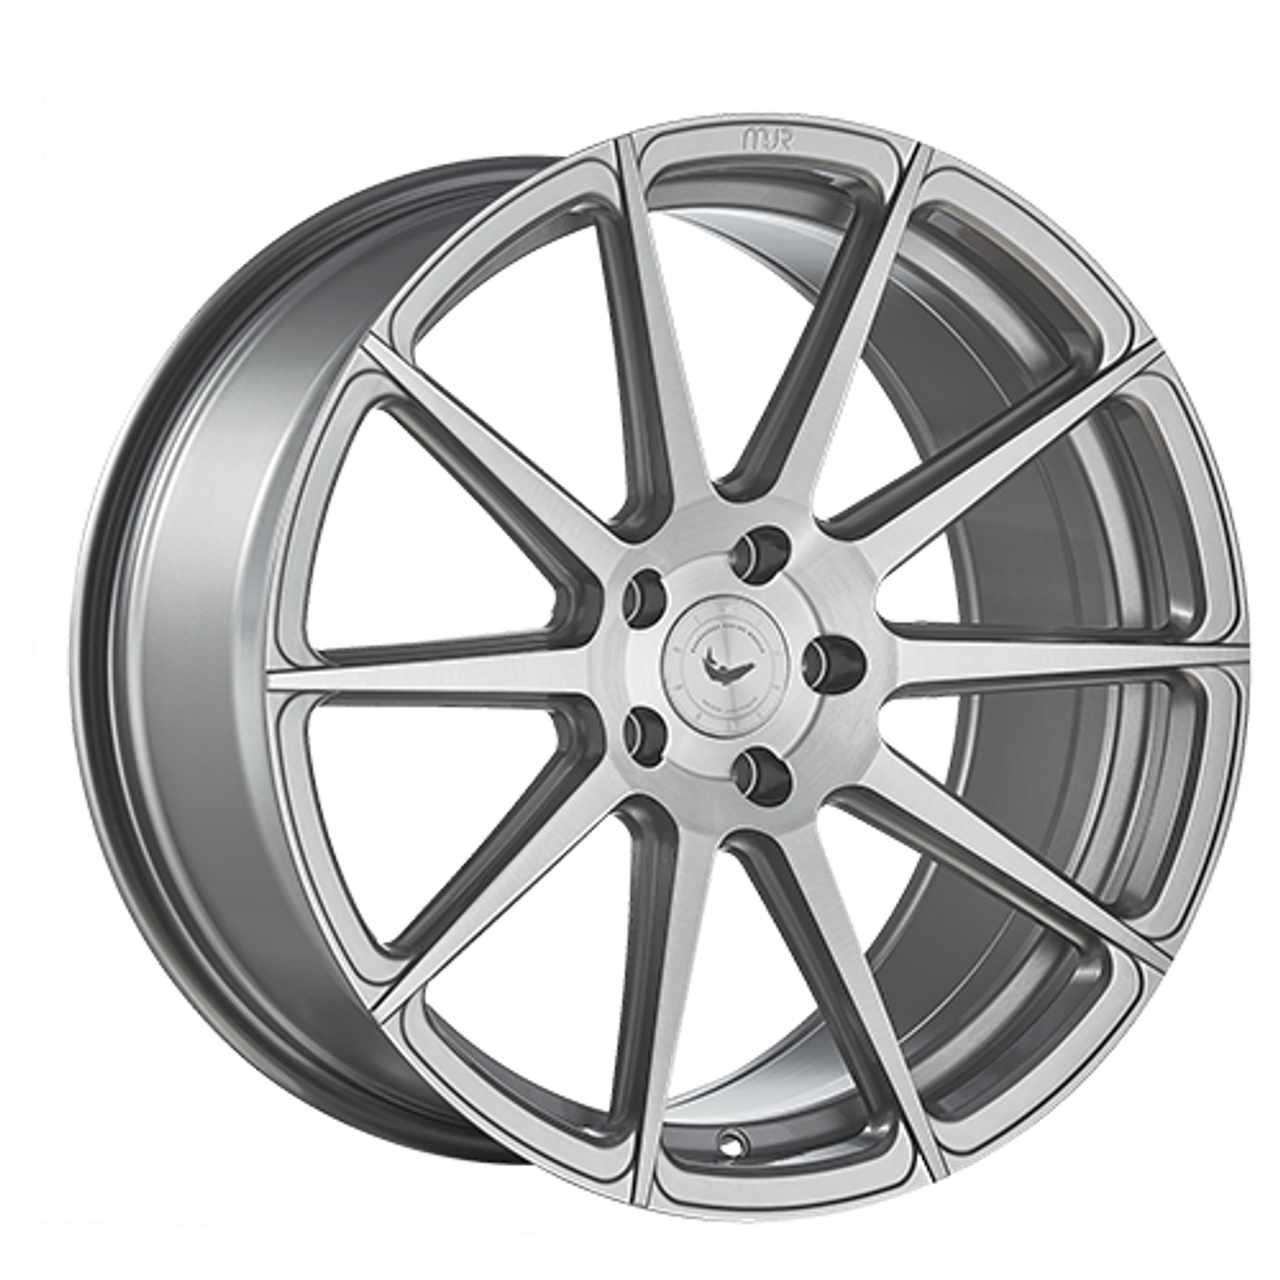 BARRACUDA PROJECT 2.0 silver brushed 10.5Jx21 5x112 ET19